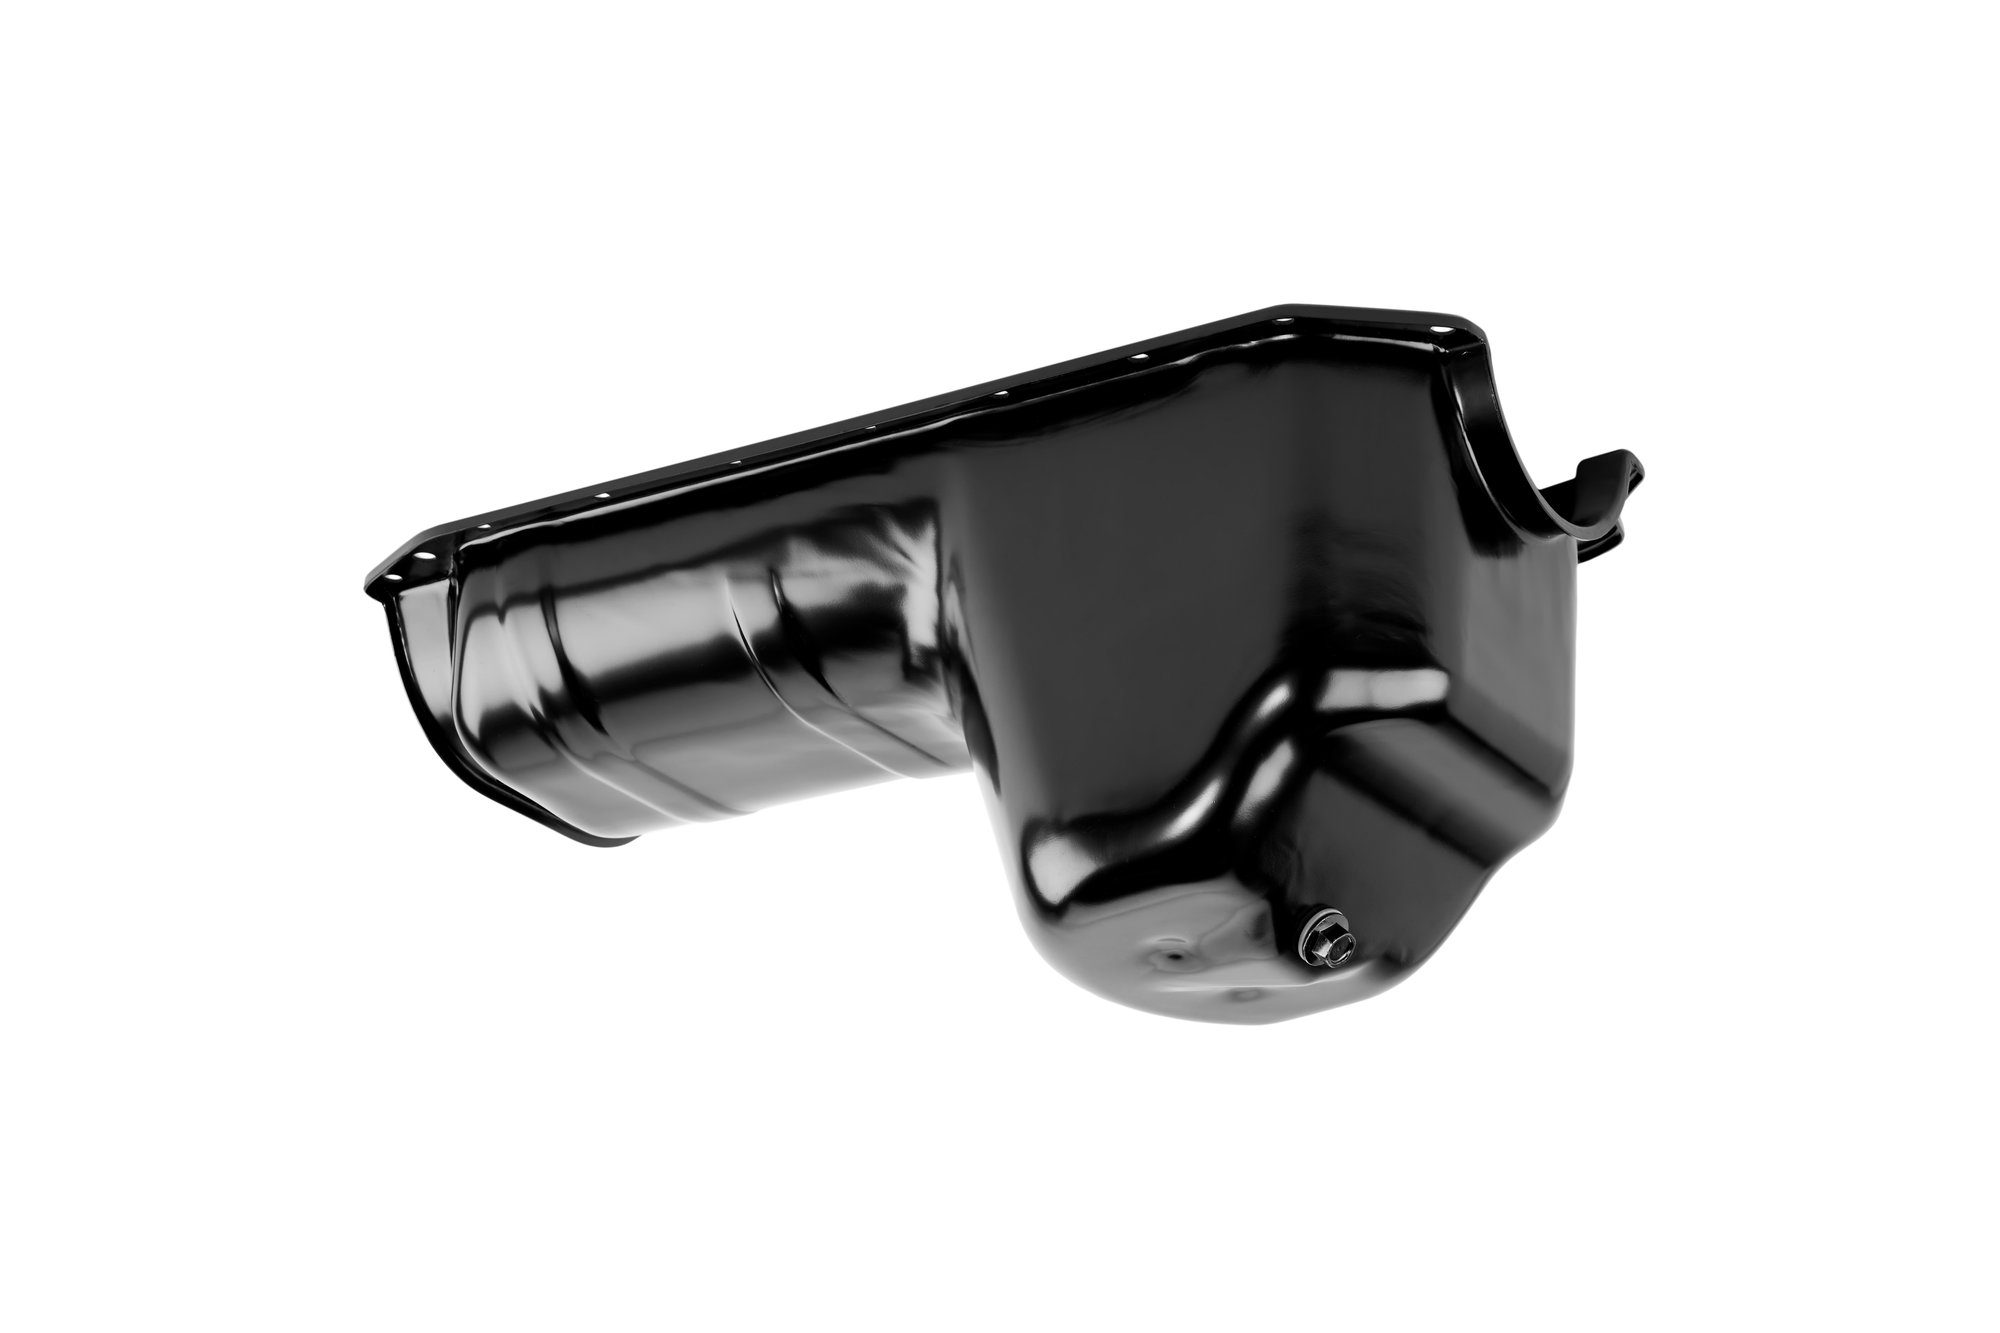 AccuPart AAJ11-57110 Oil Pan for 87-95 Jeep Wrangler YJ and 86-95 Cherokee  XJ with  Engine | Quadratec